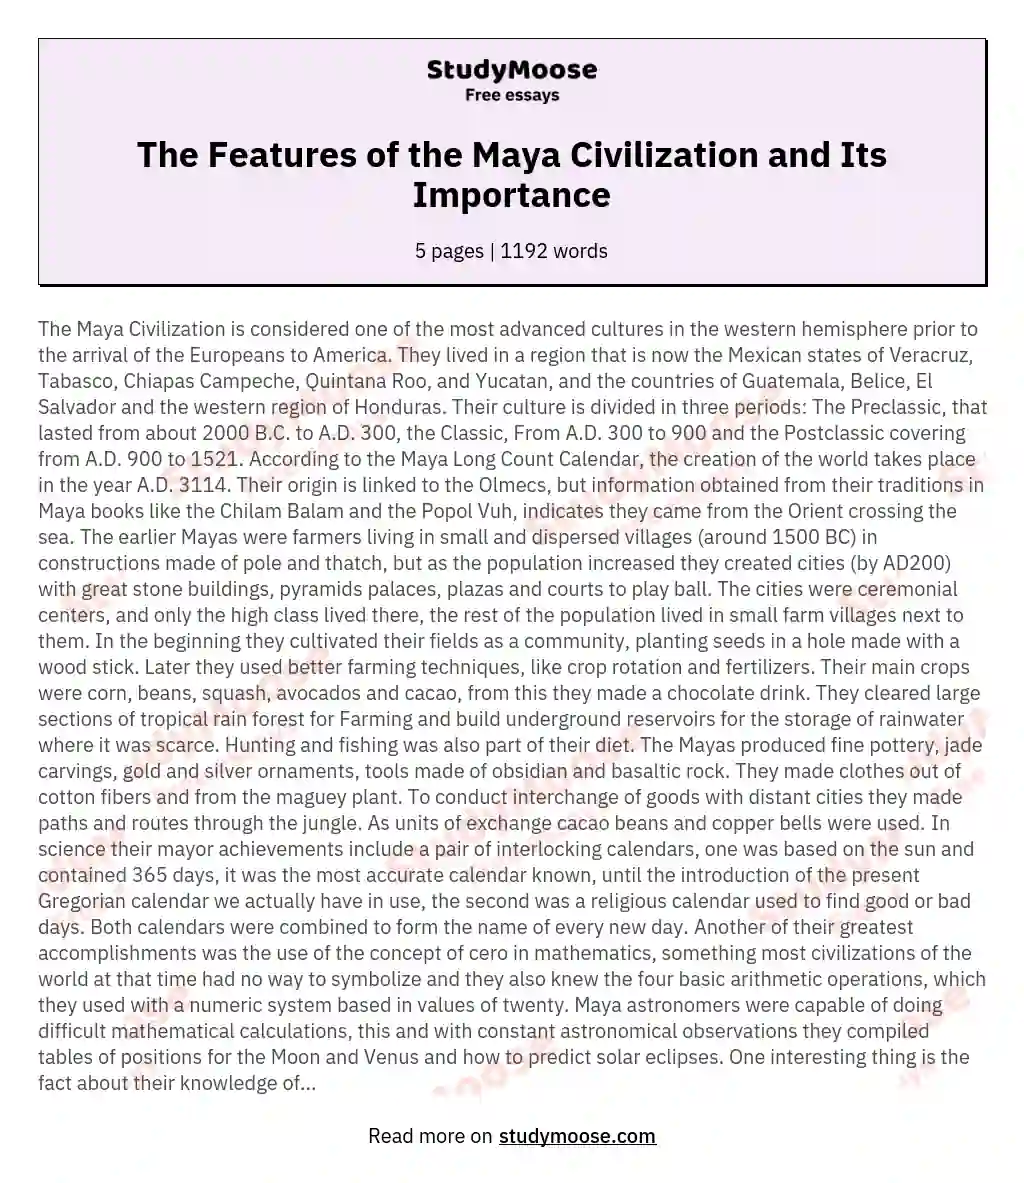 The Features of the Maya Civilization and Its Importance essay